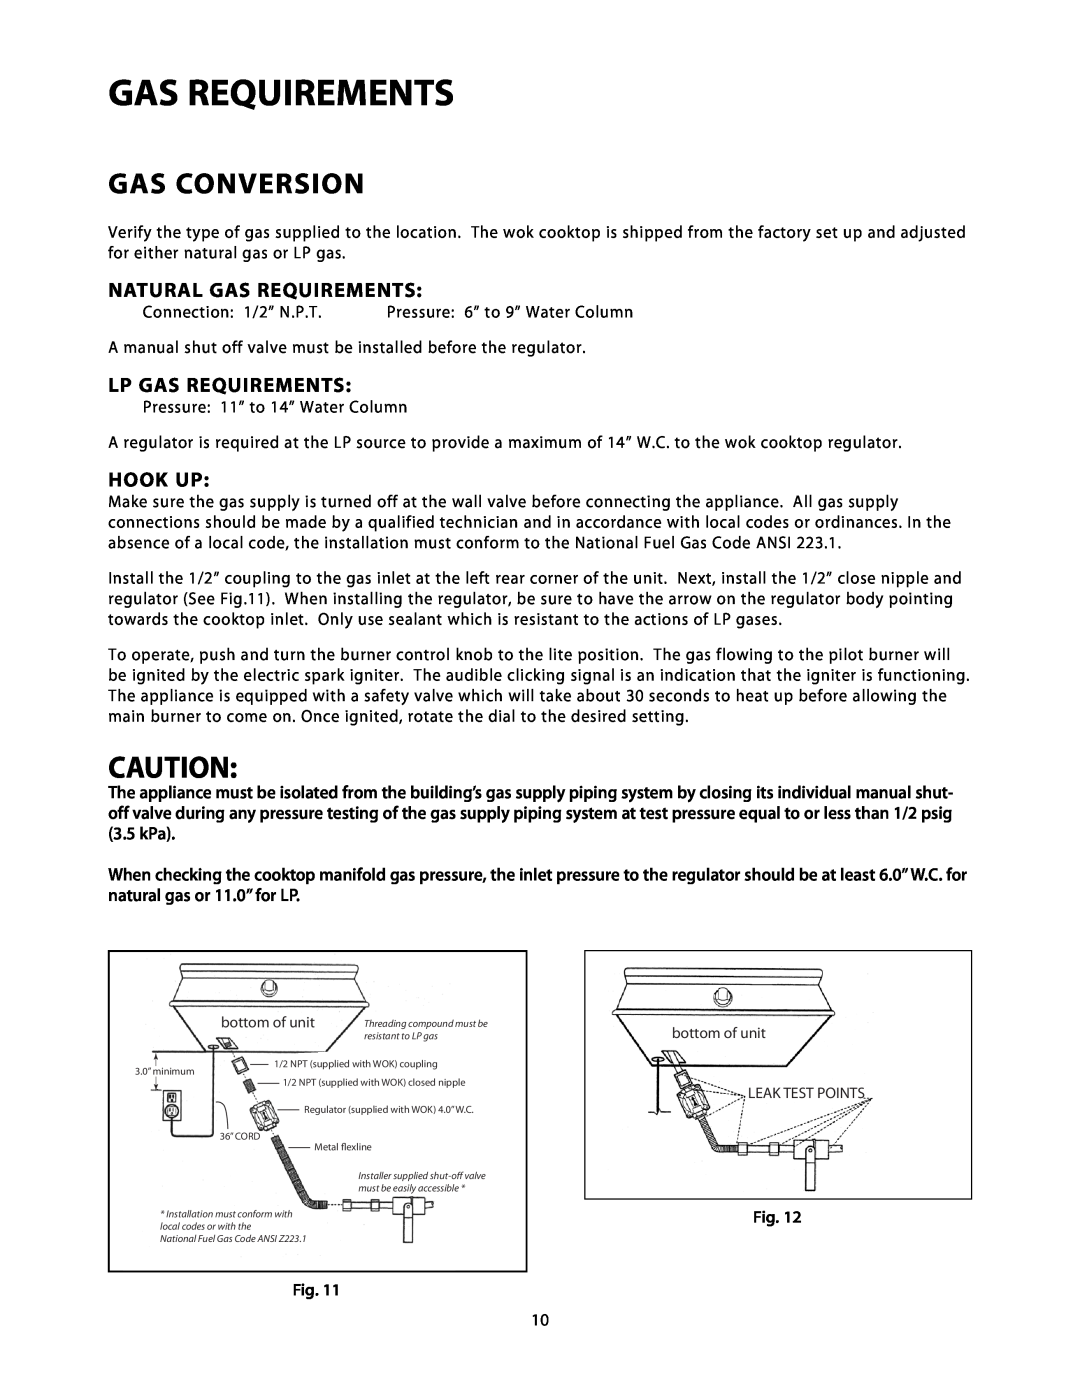 DCS C-24 installation instructions Gas Conversion, Natural Gas Requirements, Lp Gas Requirements, Hook Up 